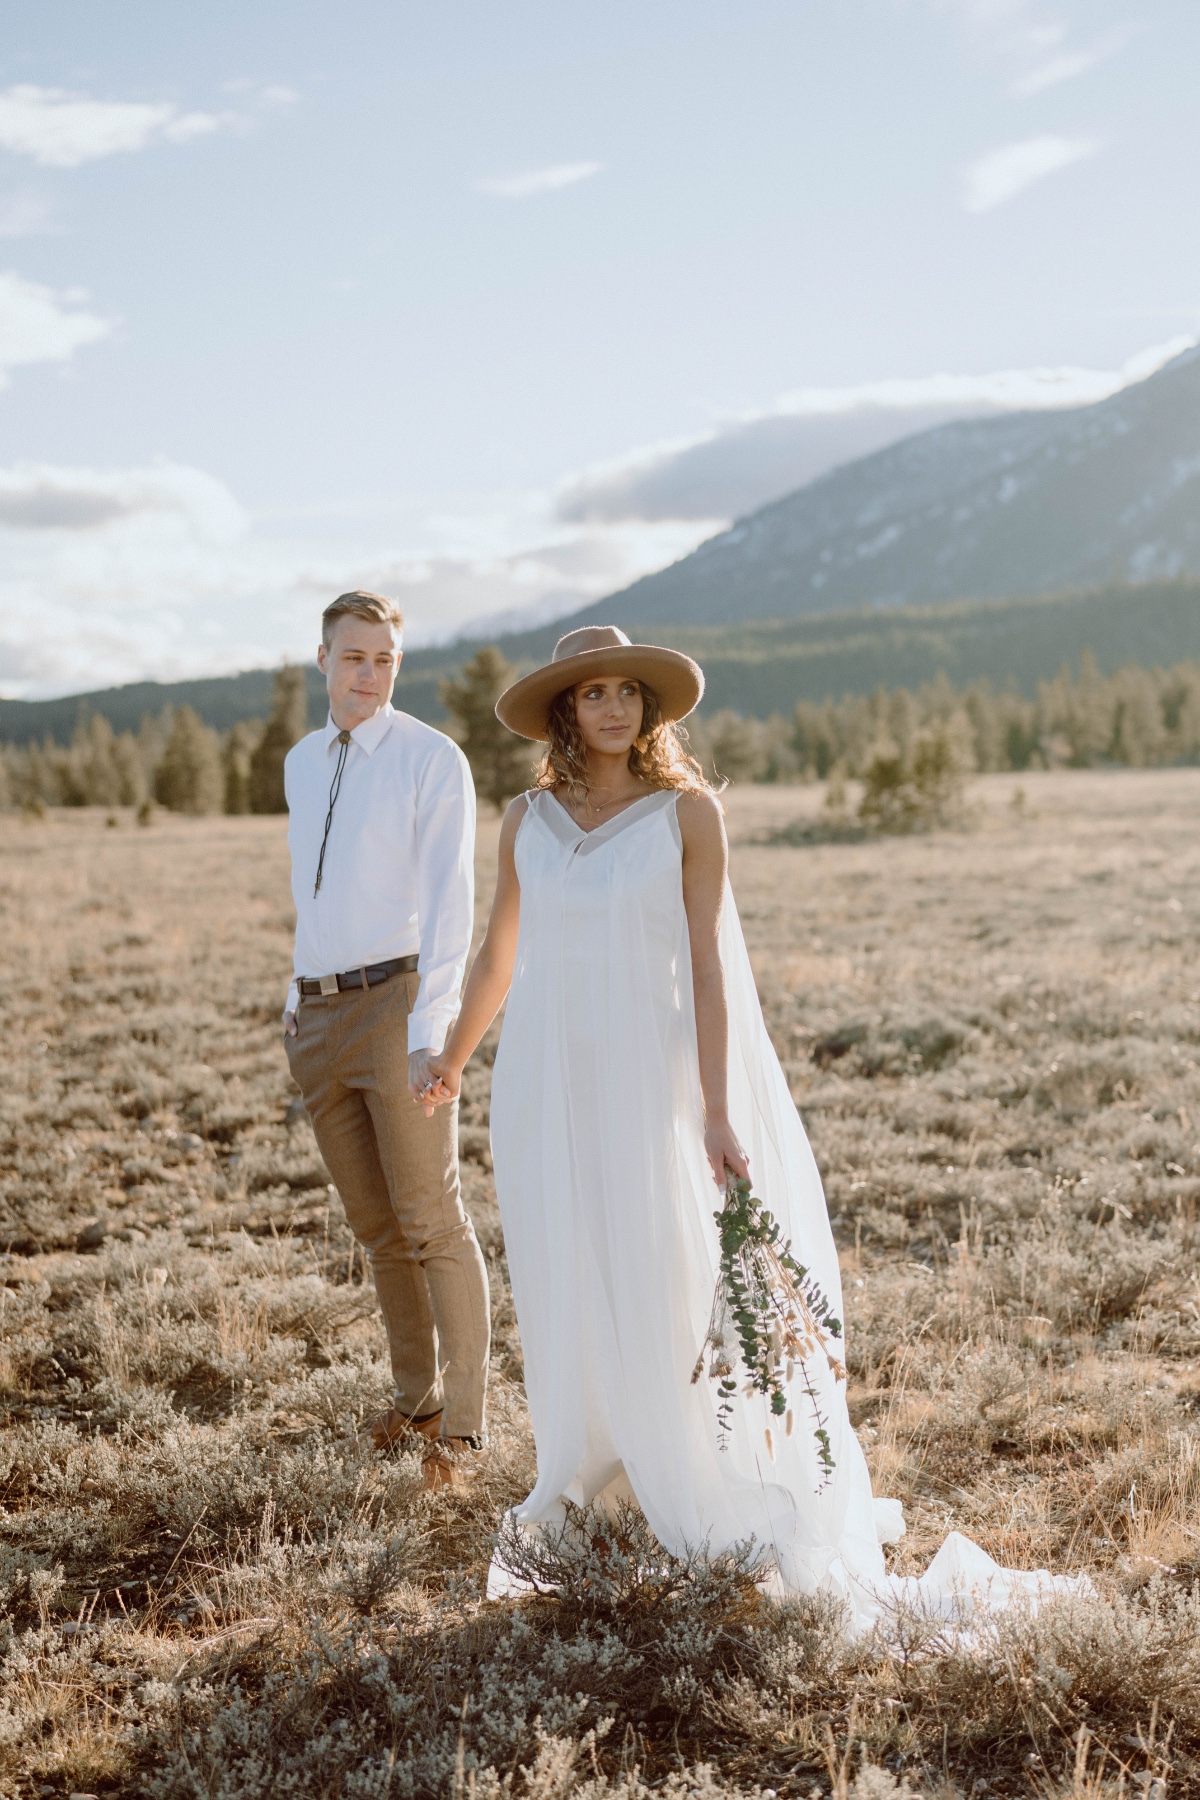 The Adventure Elopement Of Your Dreams